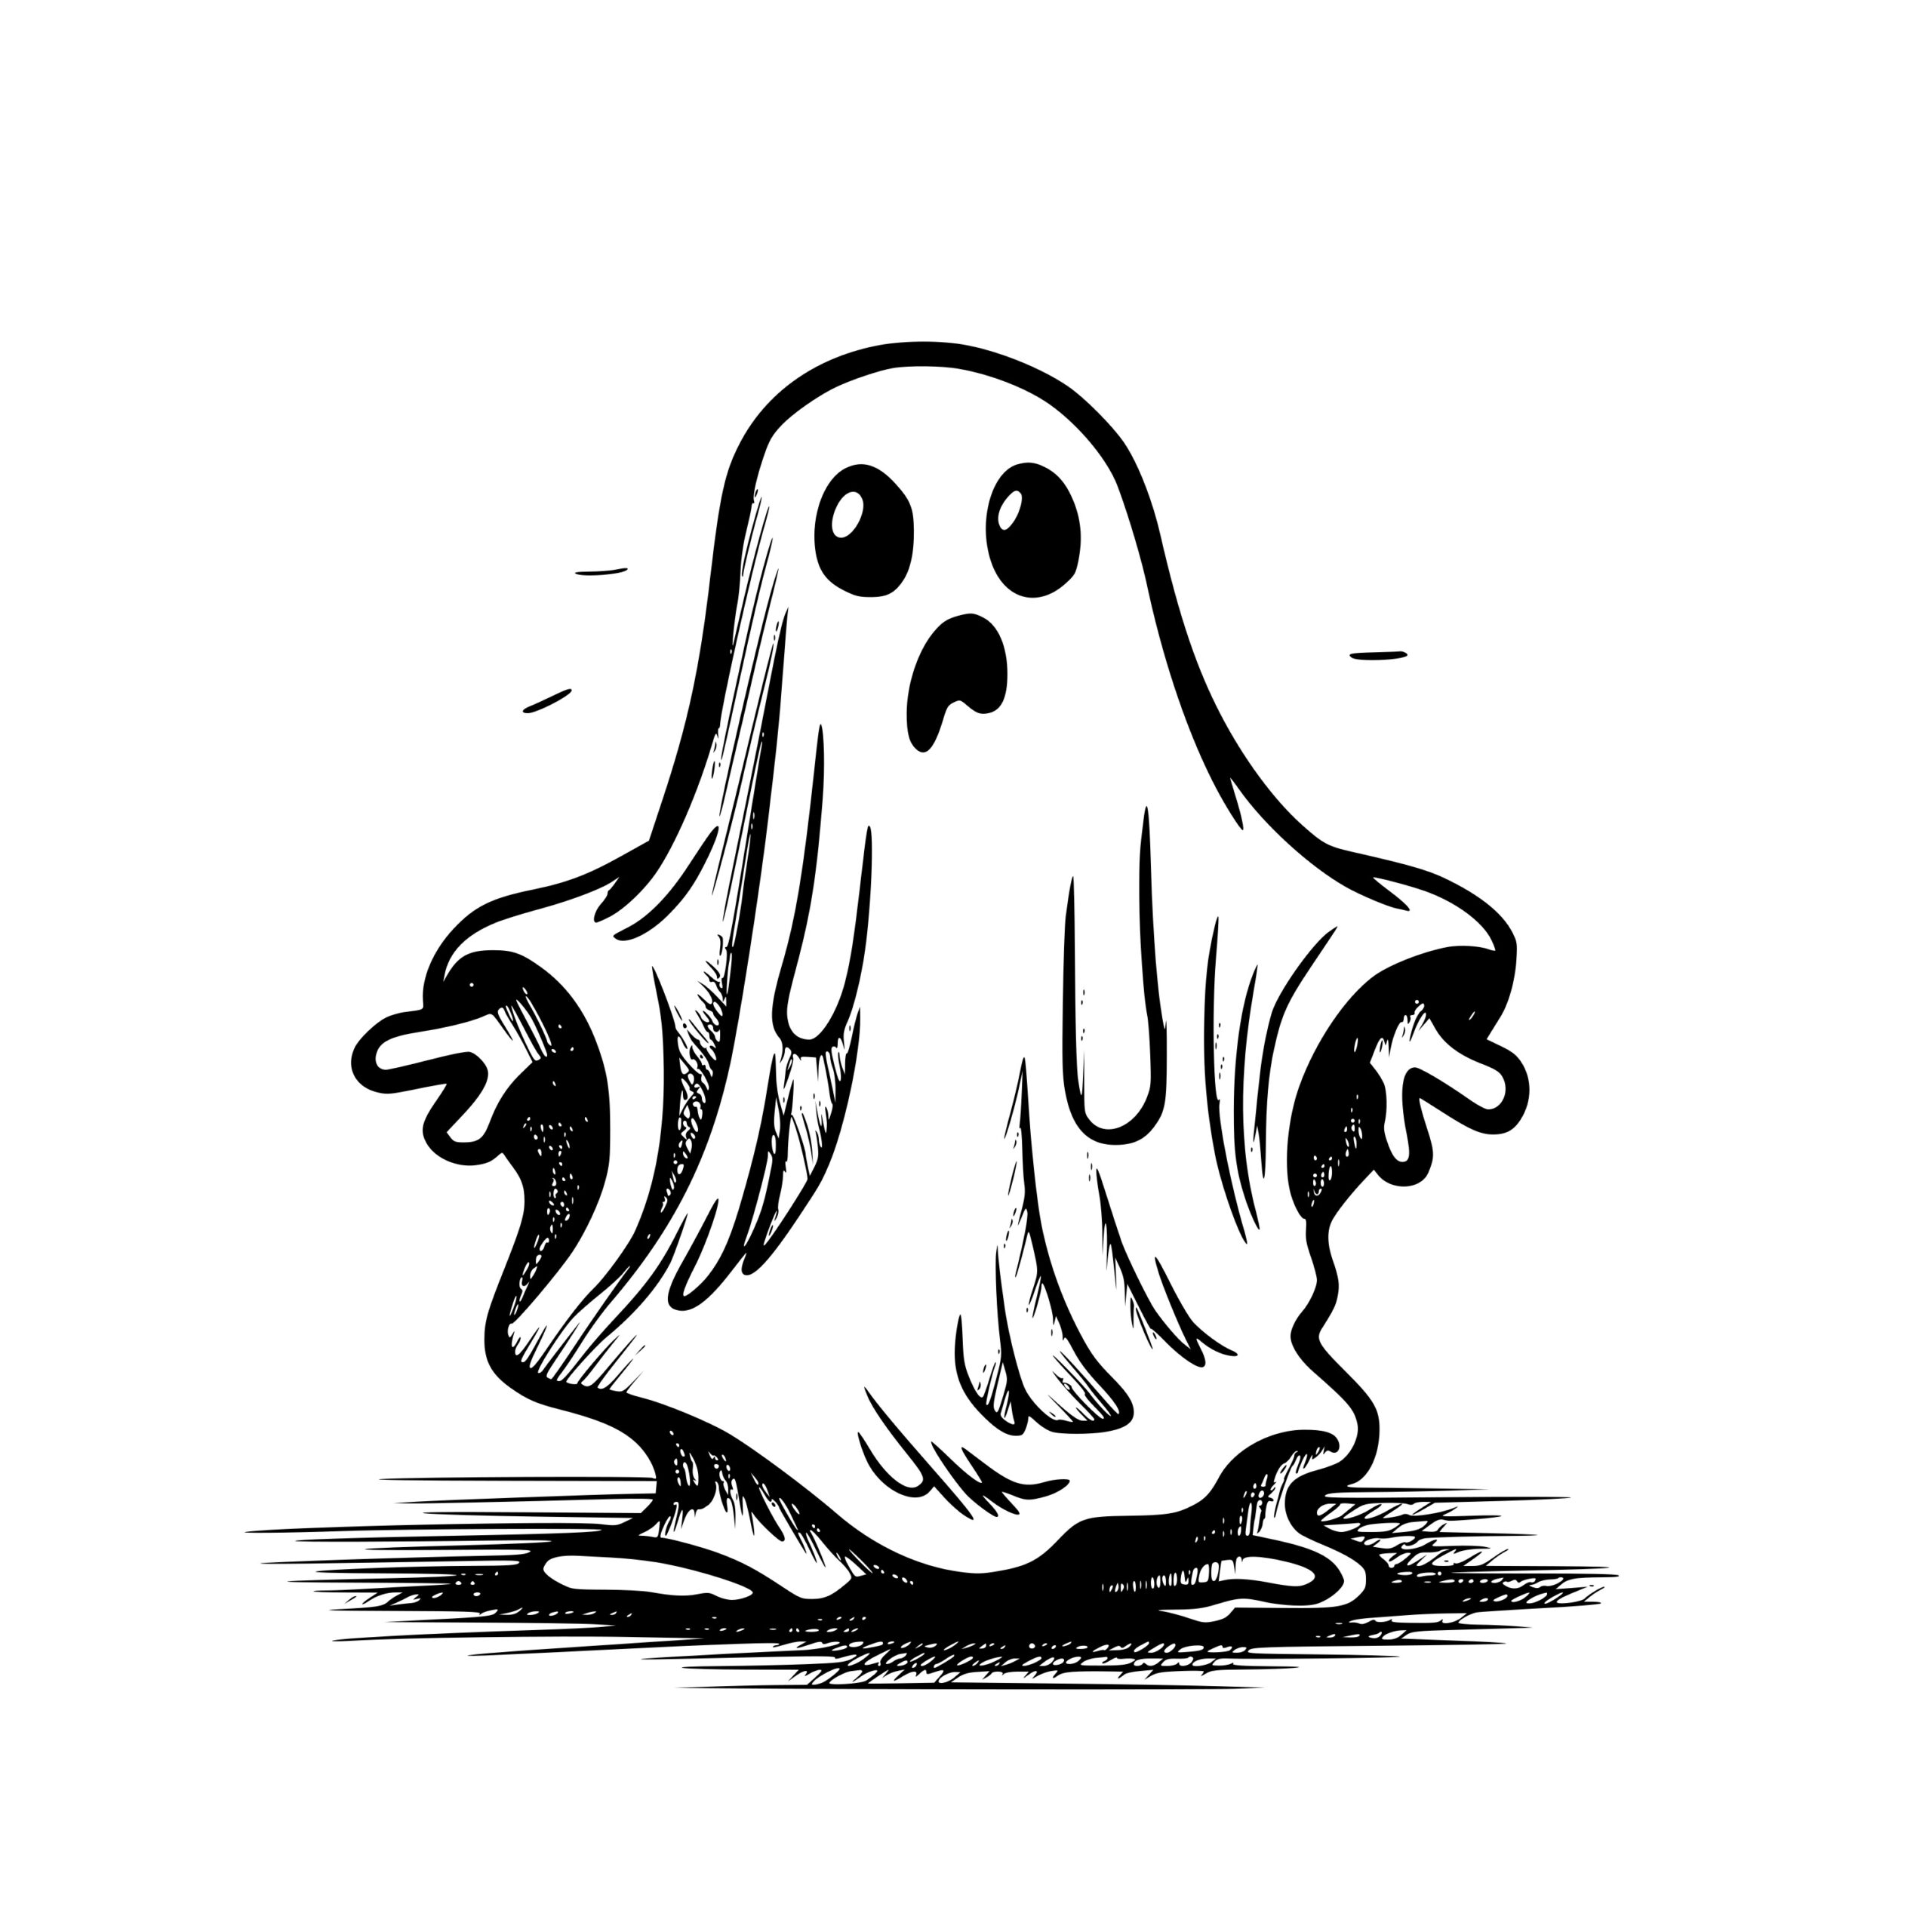 Scared Ghost SVG Image for Cricut, Silhouette, Laser Machines